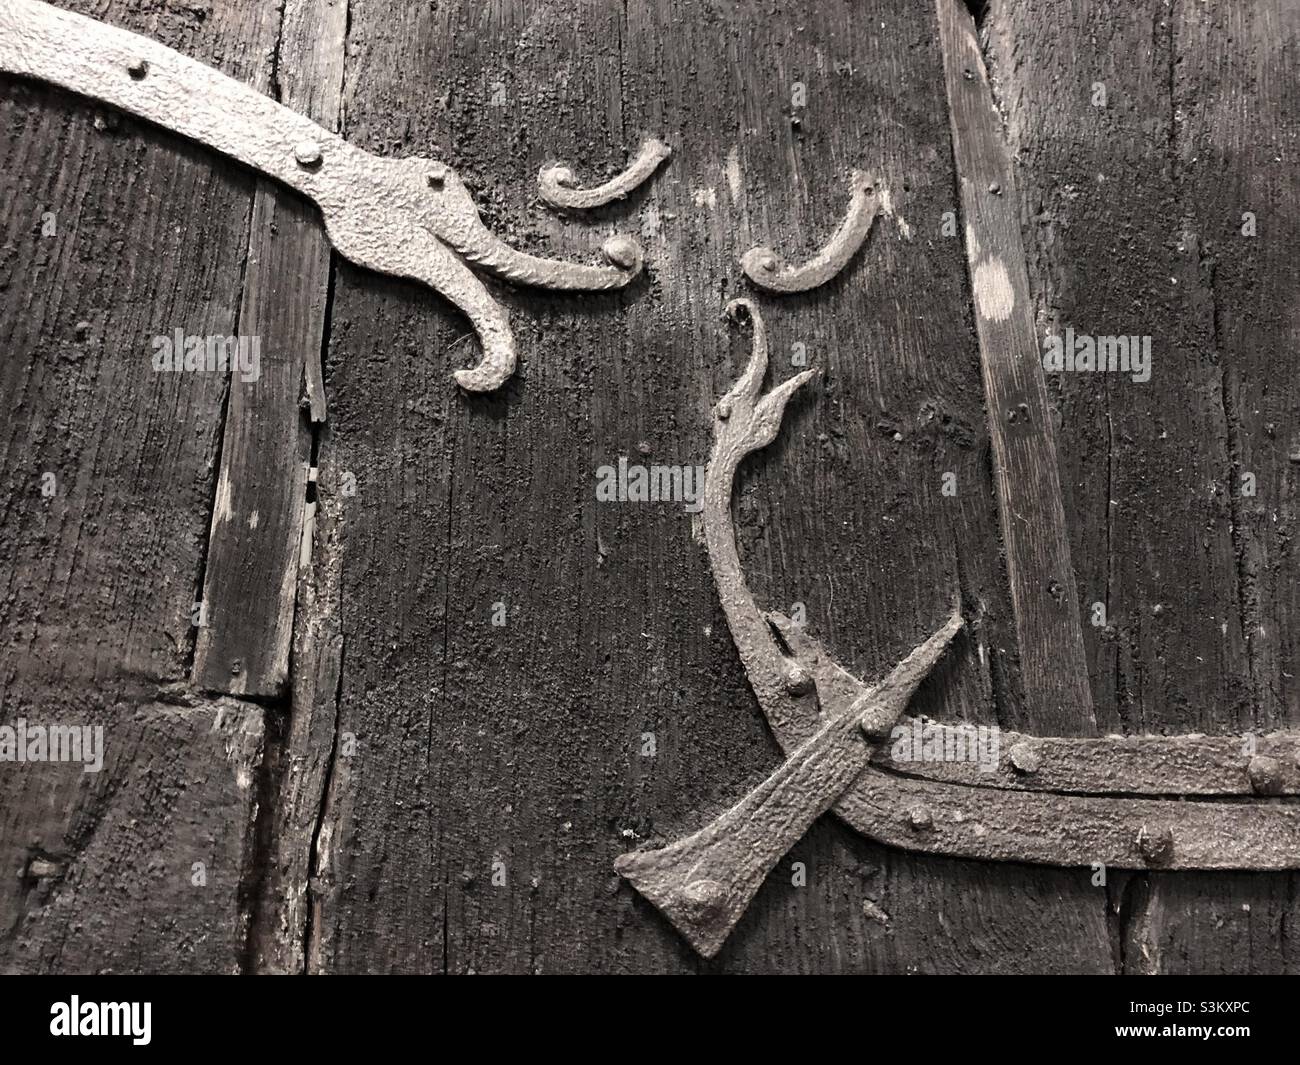 Part of the oldest door in the UK at Stillingfleet Church, near York with a unique depiction of a Viking long boat in iron strap work and a decorative dragon’s head. Stock Photo